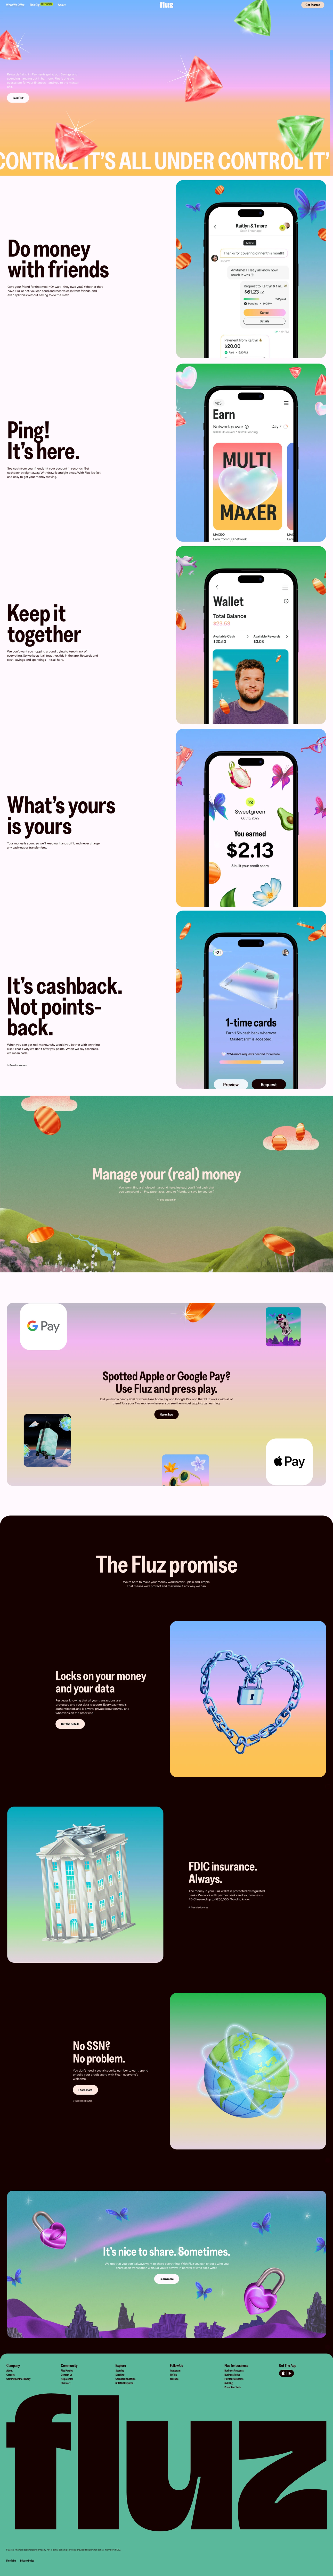 Fluz Landing Page Example: The collaborative earning app that takes your money further. Get cashback on everyday spends, earn from your network and make or receive payments with friends.